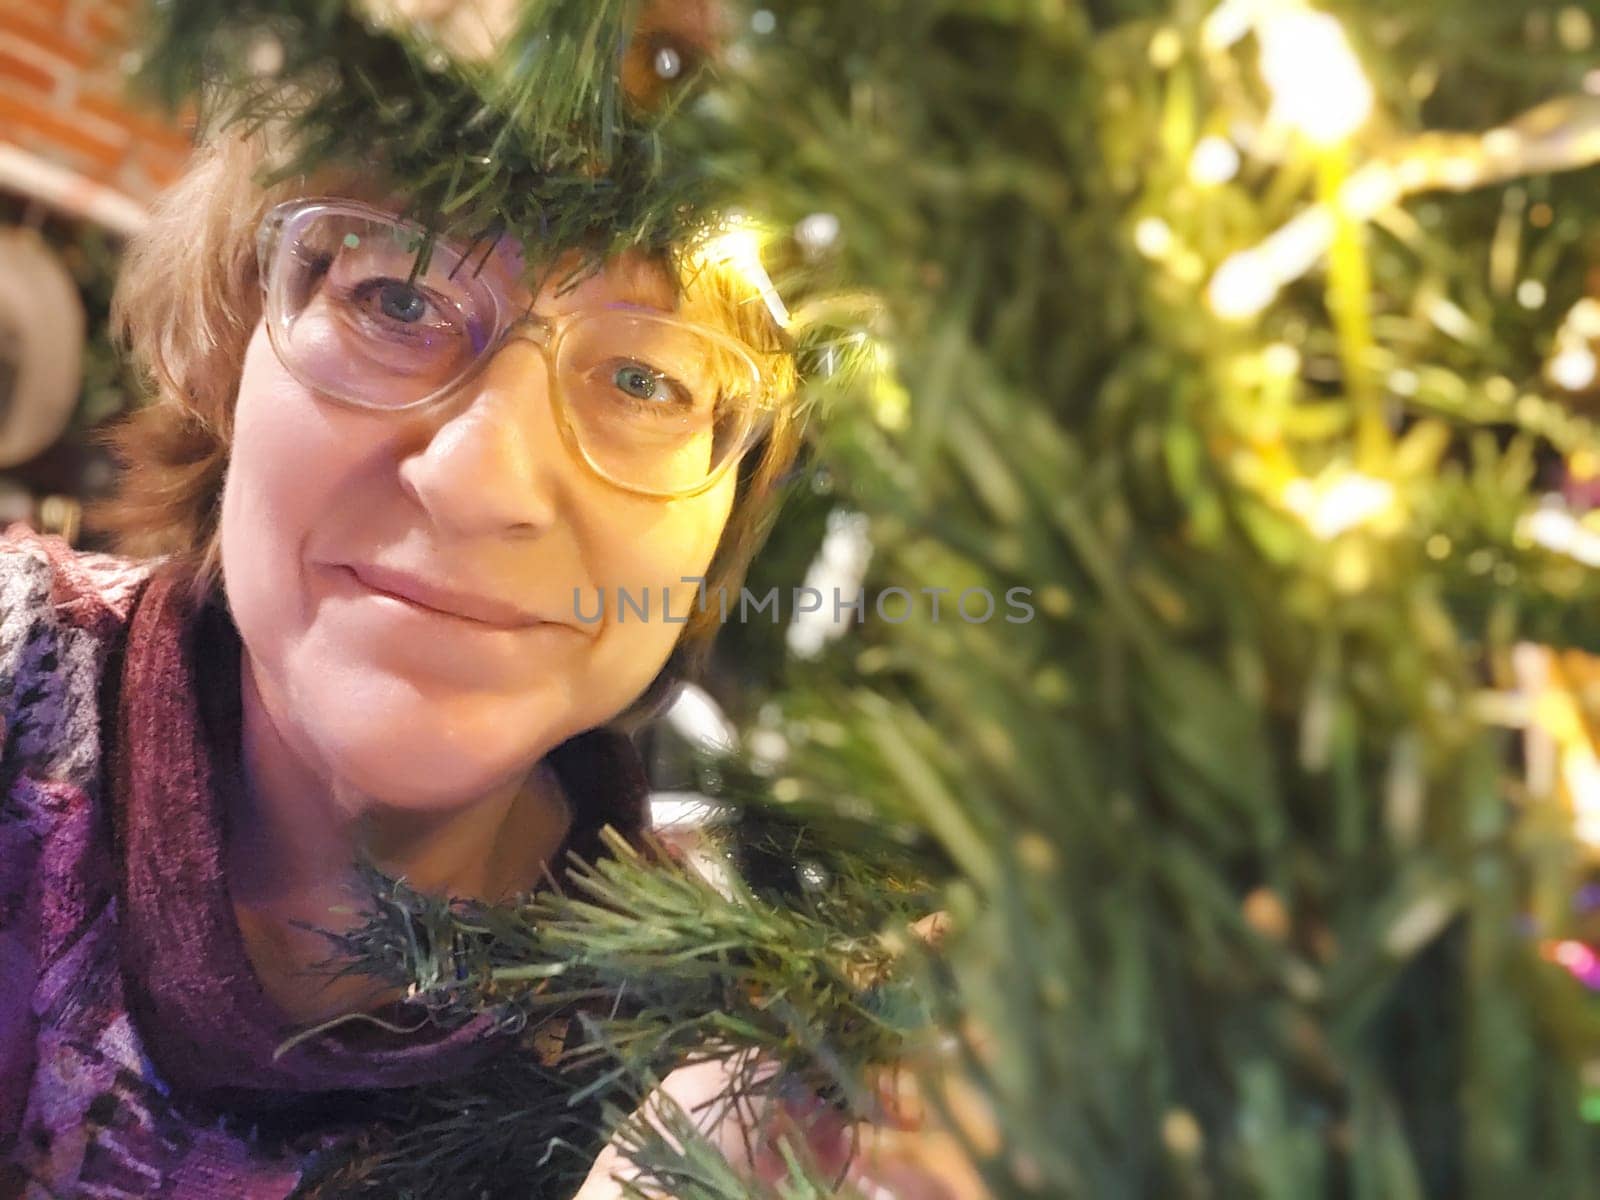 A close-up portrait of middle-aged woman smiling as she poses inside a Christmas tree. Partial focus, blurring, graininess